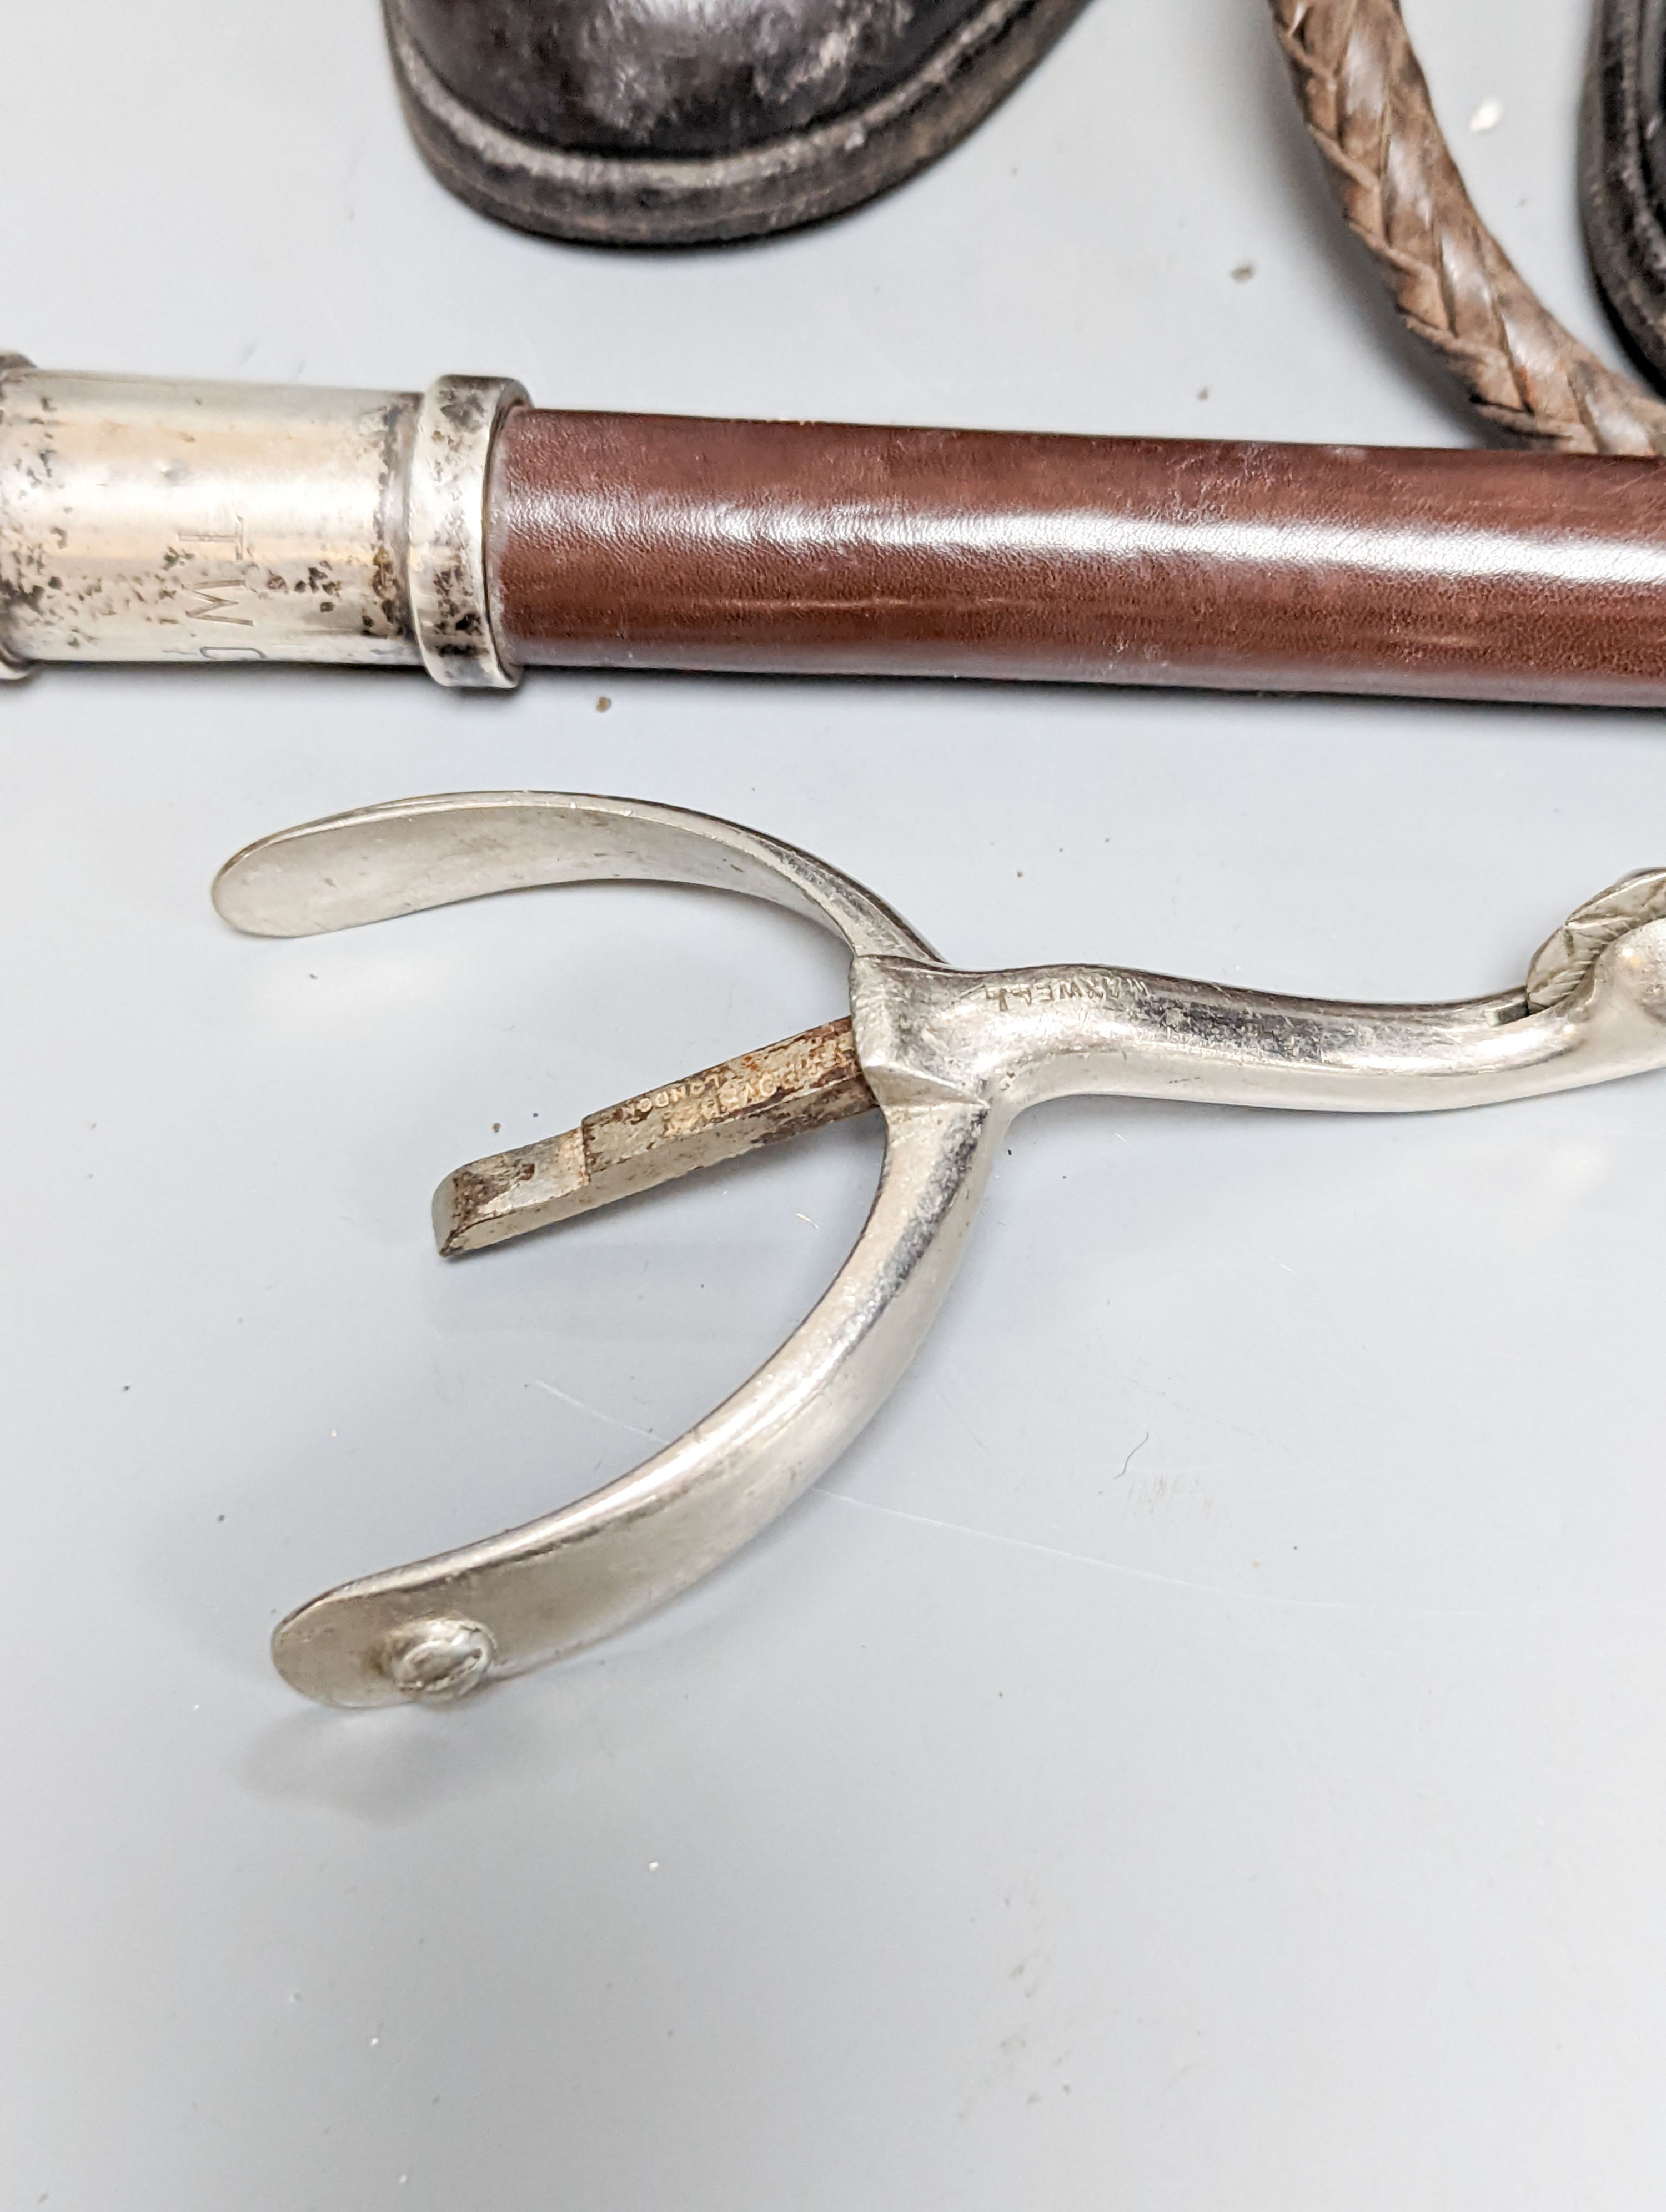 A pair of black leather riding boots with trees, a silver mounted whip and spurs